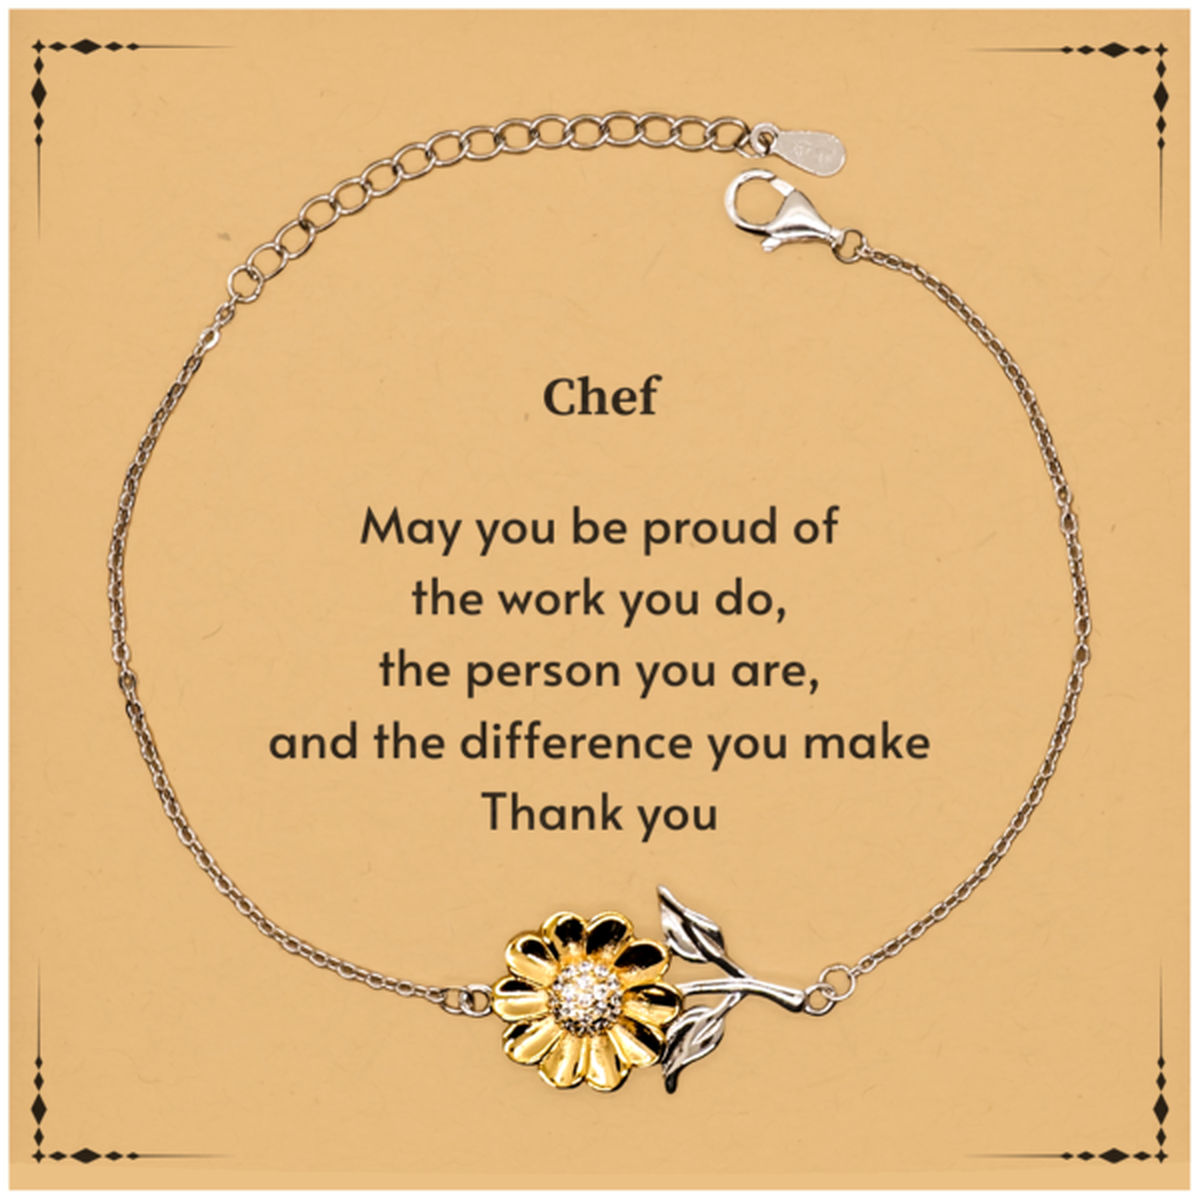 Heartwarming Sunflower Bracelet Retirement Coworkers Gifts for Chef, Chef May You be proud of the work you do, the person you are Gifts for Boss Men Women Friends